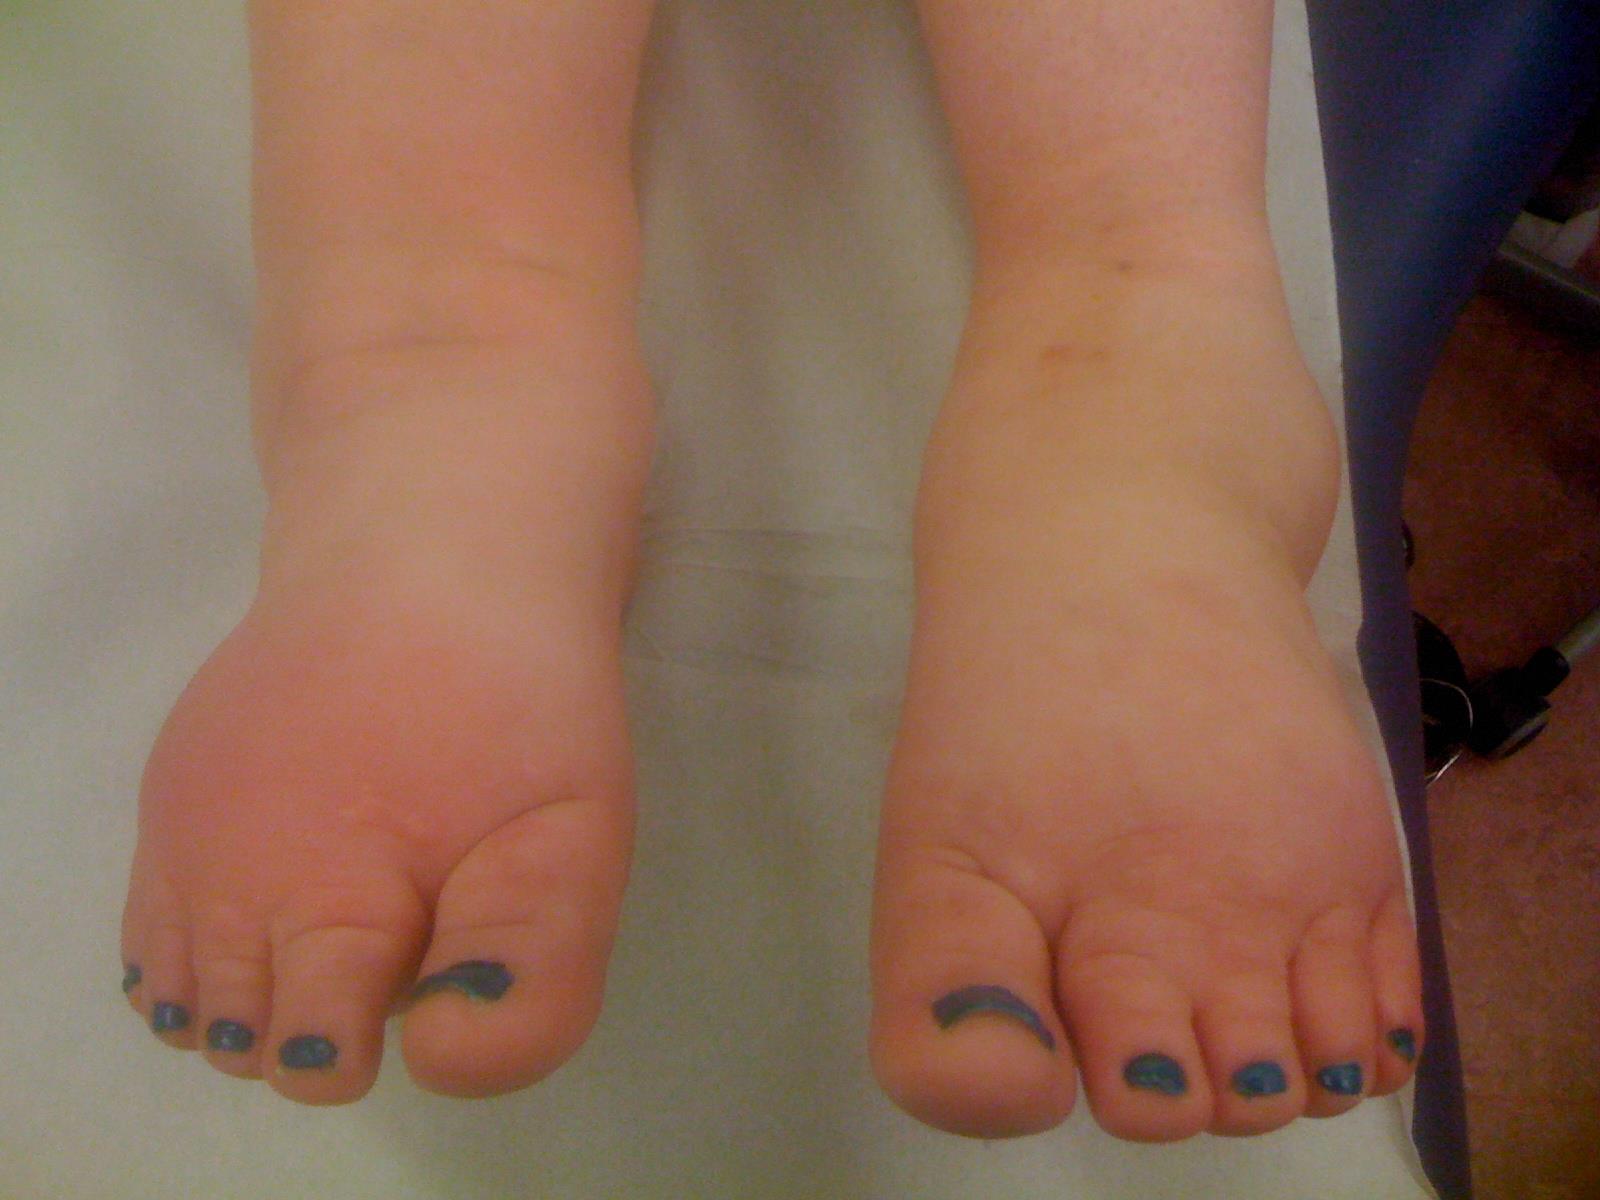 Lymphedema of the feet